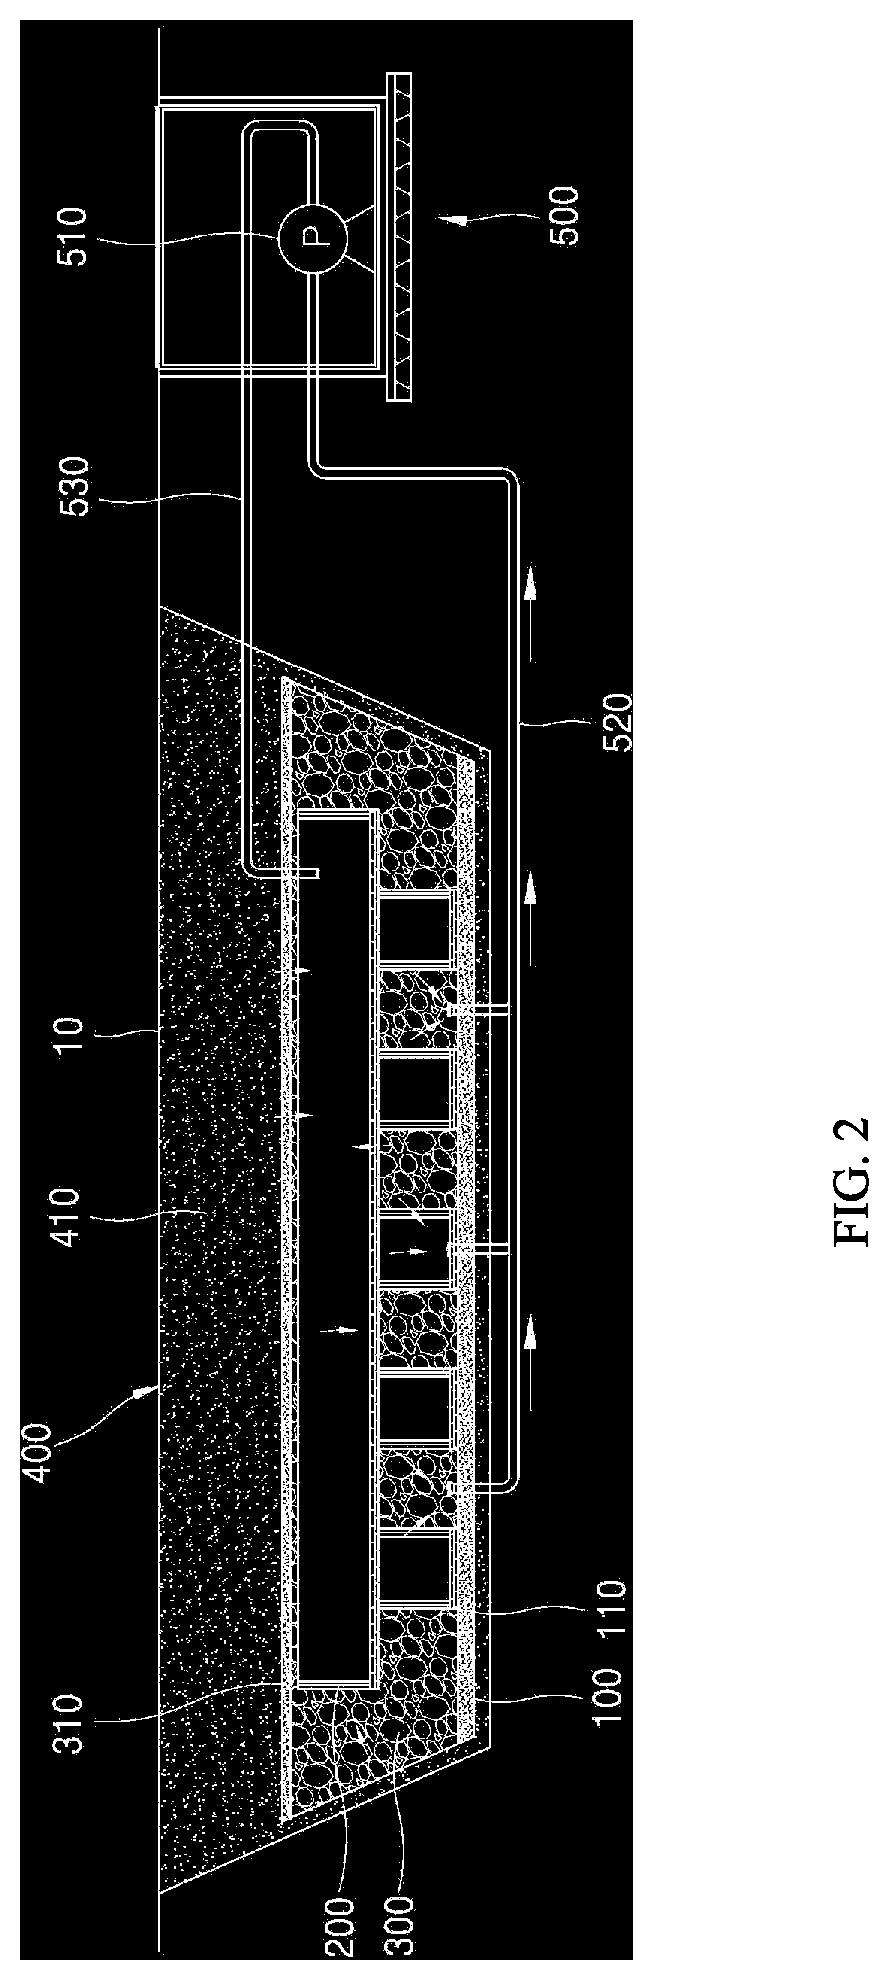 Water treatment device construction structure having grating room and method for constructing various water spaces/waterscaping facilities having same coupled thereto